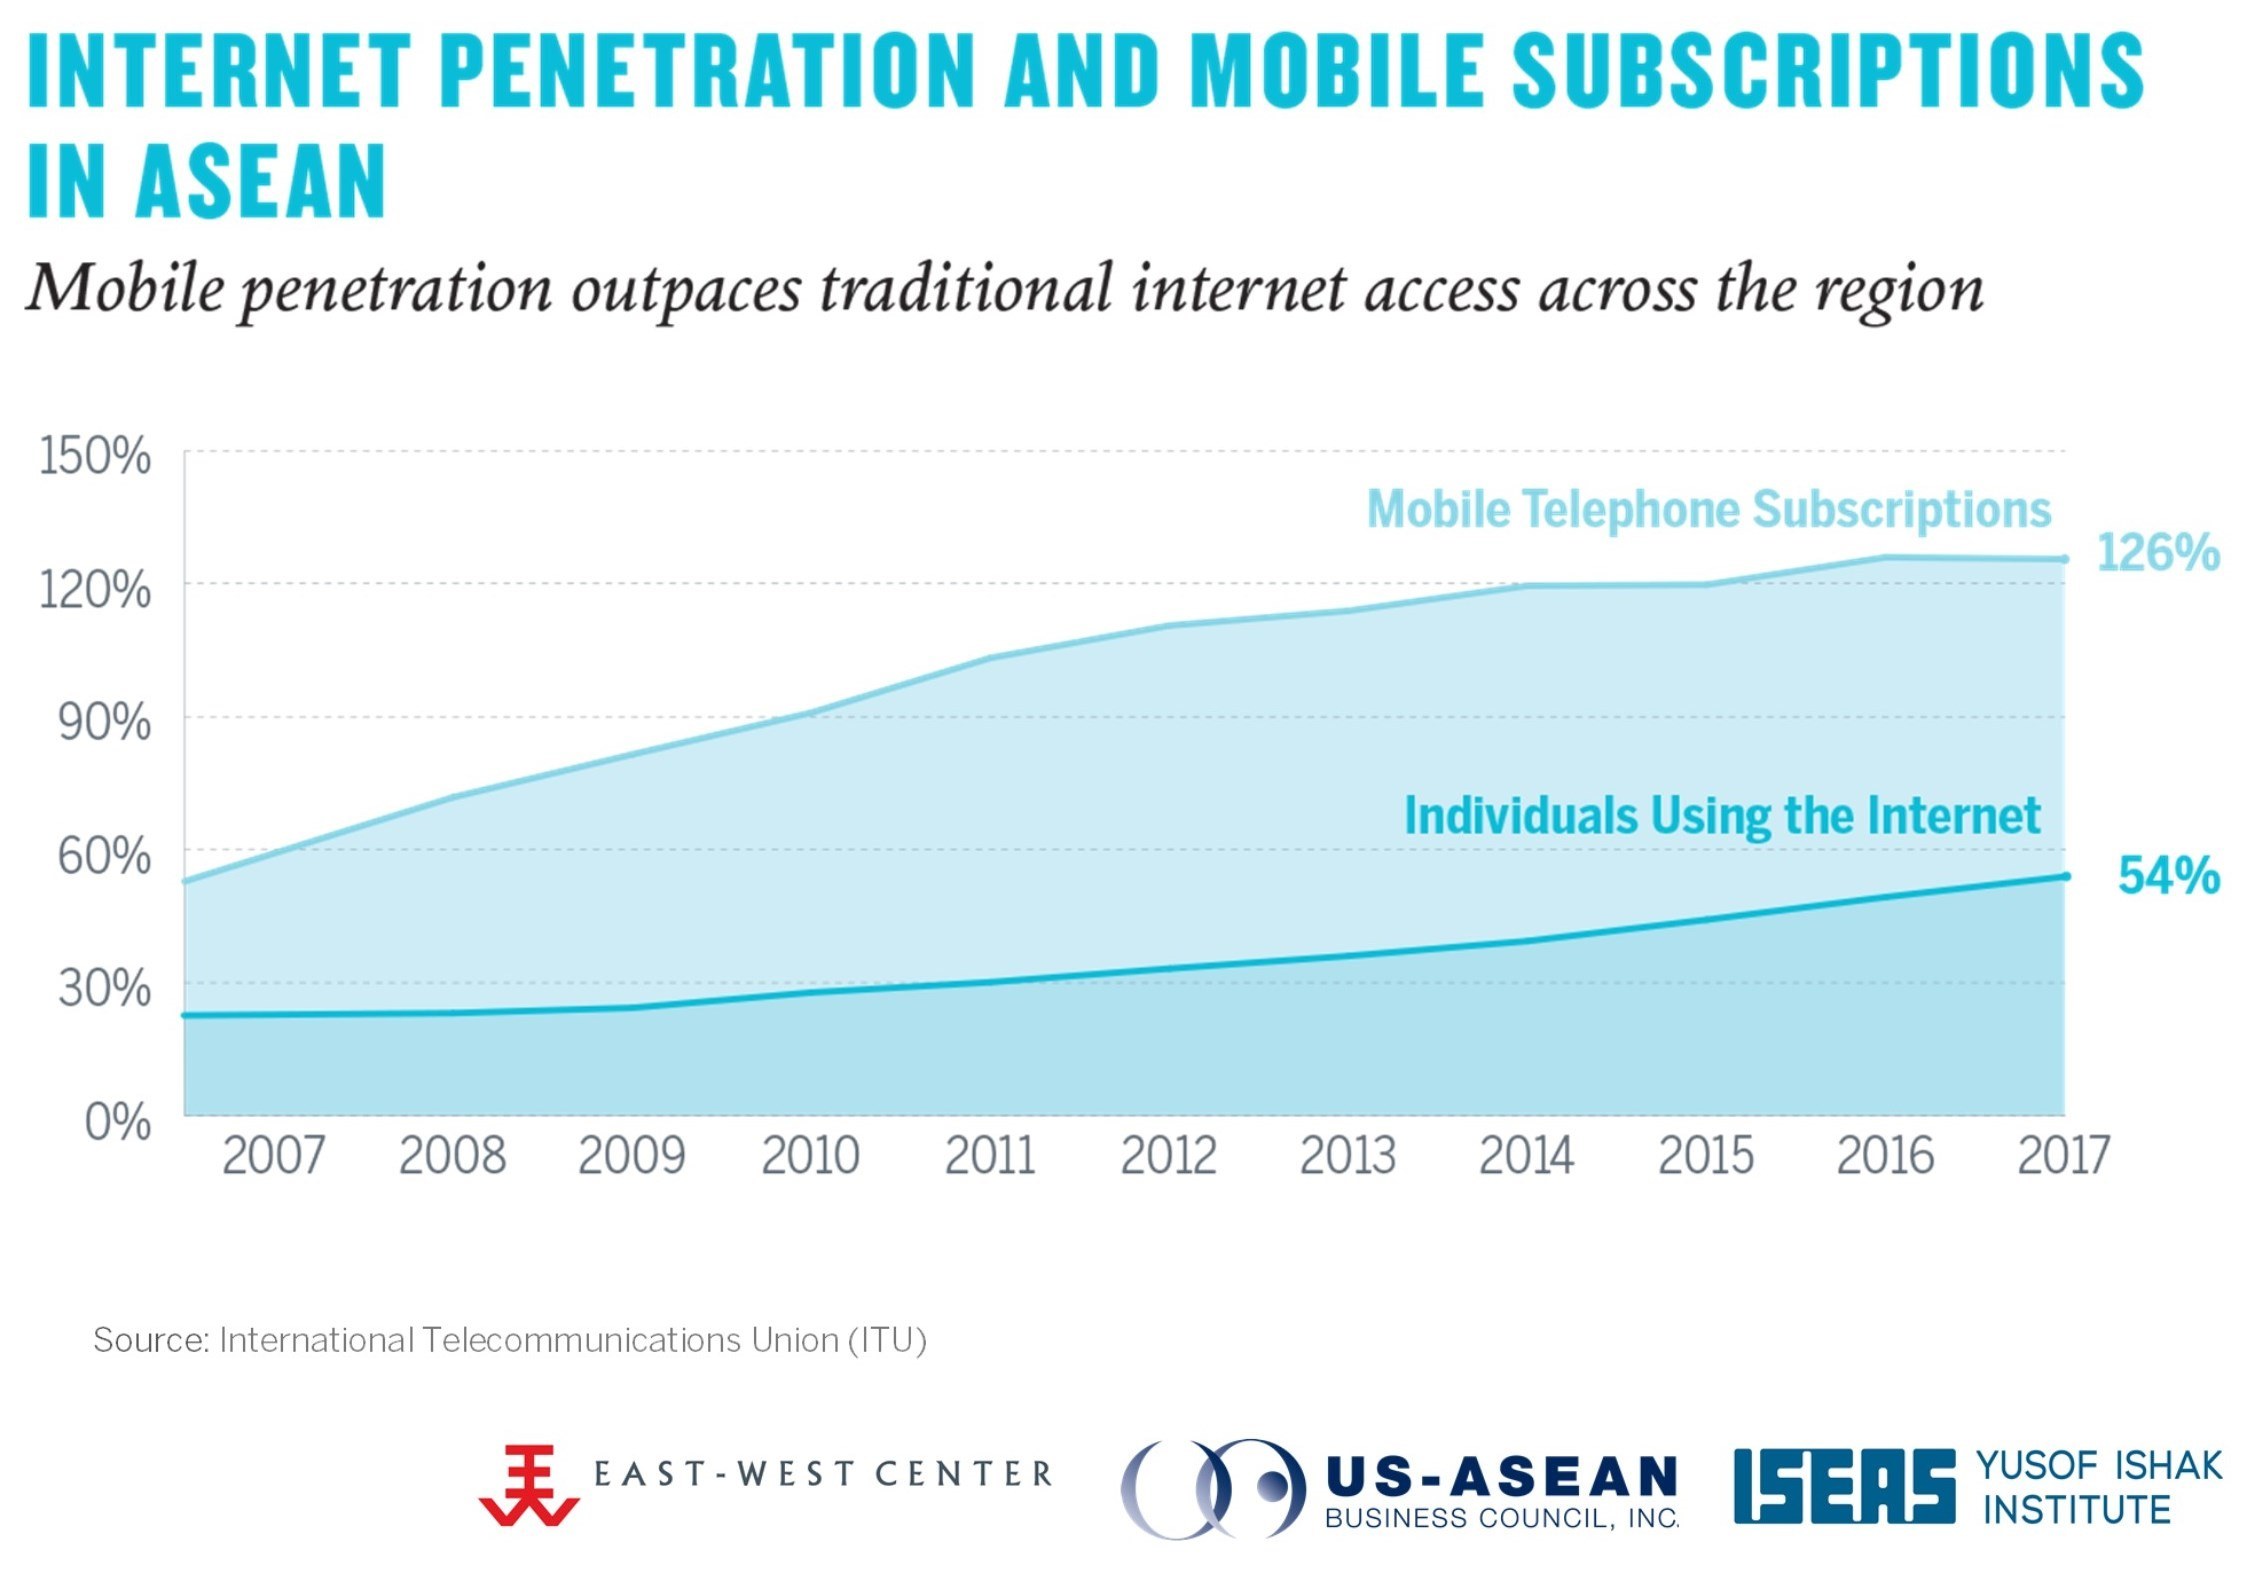 Internet Penetration and Mobile Subscriptions in ASEAN